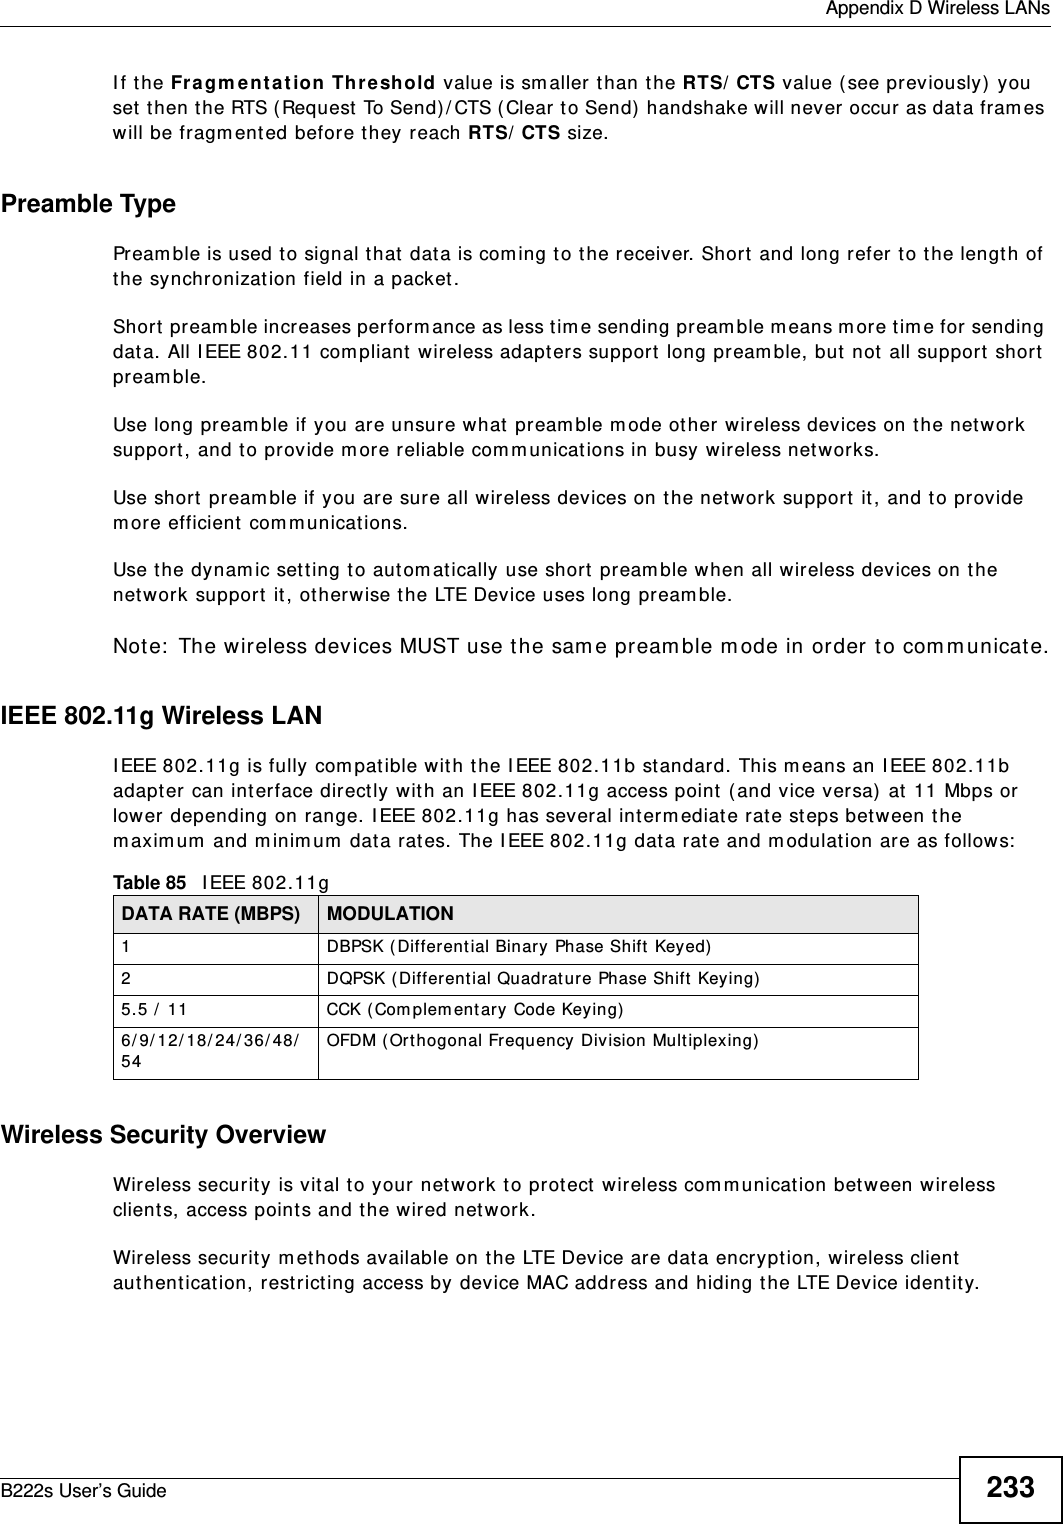  Appendix D Wireless LANsB222s User’s Guide 233I f t he Fr a gm ent at ion Thr e sh old value is sm aller t han t he RTS/ CTS value ( see previously)  you set  t hen t he RTS (Request To Send)/ CTS ( Clear to Send)  handshake will never occur  as dat a fram es will be fragm ented before they reach RTS/ CTS size.Preamble TypePream ble is used t o signal t hat  dat a is com ing t o t he receiver. Short  and long refer to t he length of the synchronizat ion field in a packet.Short  pream ble incr eases perform ance as less tim e sending pream ble m eans m ore tim e for sending dat a. All I EEE 802.11 com pliant  wireless adapt ers support  long pream ble, but  not  all support  short  pream ble. Use long pream ble if you are unsure what  pream ble m ode ot her wireless devices on t he net work support , and to provide m ore reliable com m unicat ions in busy wireless net w orks. Use short  pream ble if you are sure all wireless devices on t he network support  it , and t o provide m ore efficient  com m unicat ions.Use t he dynam ic setting t o aut om at ically use short  pream ble w hen all wireless devices on t he network support  it , ot herwise the LTE Device uses long pream ble.Not e:  The wireless dev ices MUST use the sam e pream ble m ode in order t o com m unicate.IEEE 802.11g Wireless LANI EEE 802.11g is fully com pat ible w ith the I EEE 802.11b st andard. This m eans an I EEE 802.11b adapt er can int erface direct ly with an I EEE 802.11g access point  ( and vice versa) at 11 Mbps or lower depending on range. I EEE 802.11g has several interm ediate rate st eps bet ween the m axim um  and m inim um  data rat es. The I EEE 802.11g dat a rat e and m odulation are as follows:Wireless Security OverviewWireless securit y  is vit al to your network to prot ect wireless com m unicat ion bet w een wireless clients, access point s and t he wired network.Wireless securit y m ethods available on the LTE Device are data encrypt ion, wireless client  authent icat ion, restrict ing access by device MAC address and hiding t he LTE Device identit y.Table 85   I EEE 802.11gDATA RATE (MBPS) MODULATION1 DBPSK ( Differential Binary Phase Shift Keyed)2 DQPSK (Different ial Quadrat ur e Phase Shift  Keying)5.5 /  11 CCK ( Com plem ent ary Code Keying)  6/9/12/18/24/36/48/54OFDM ( Or t hogonal Frequency Division Mult iplexing)  